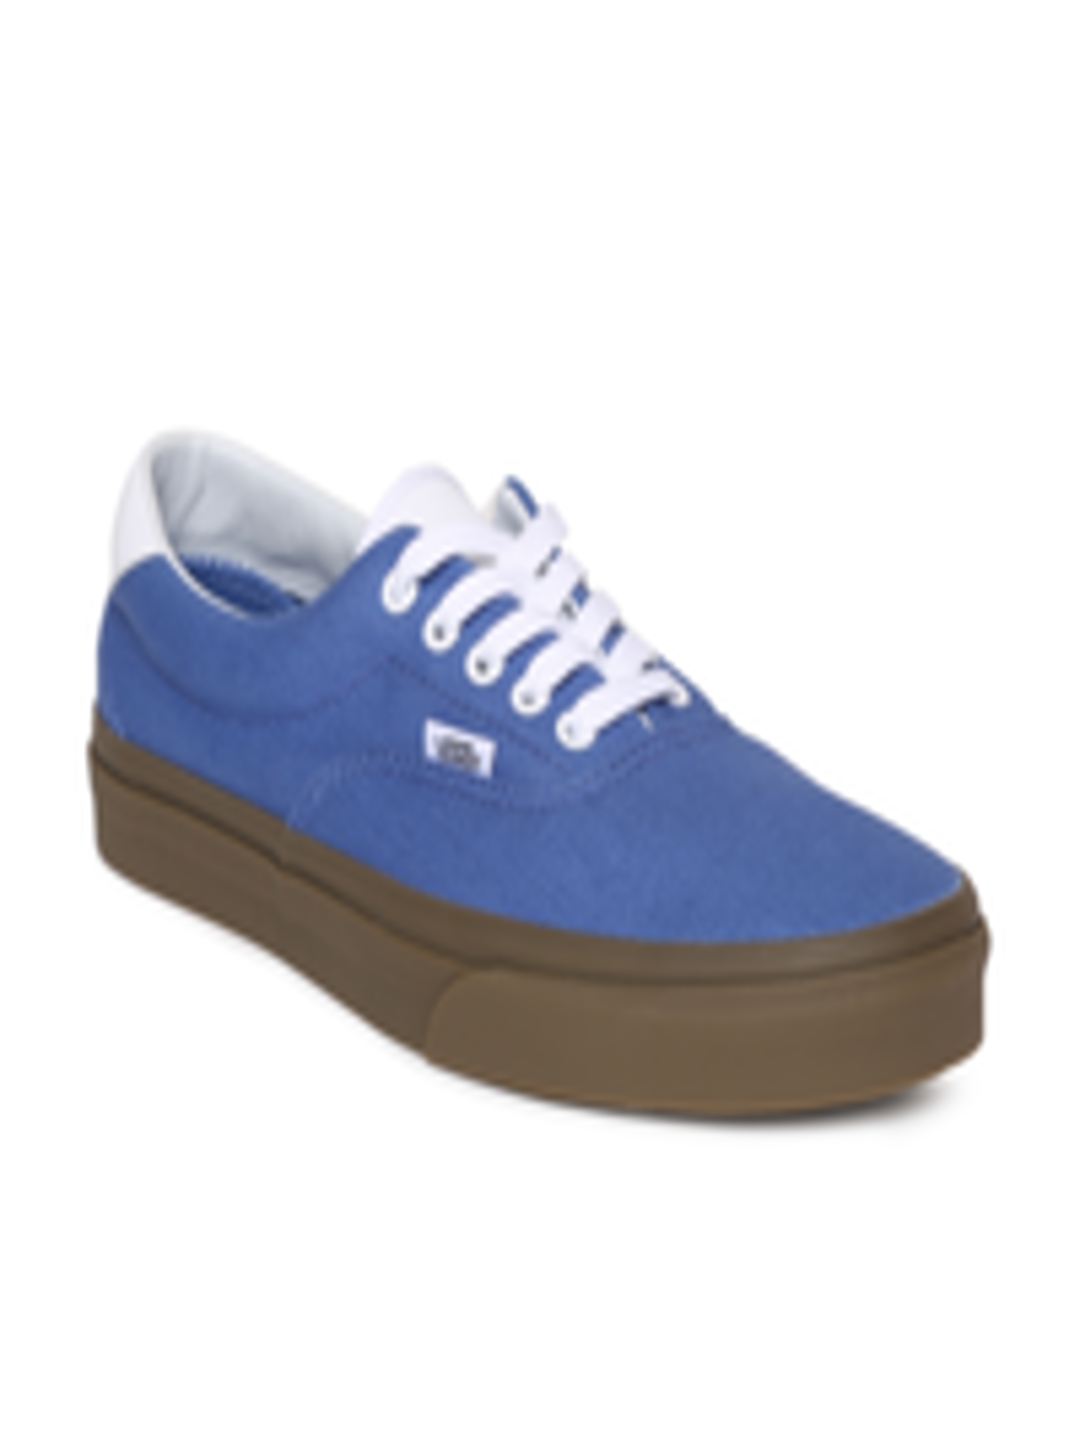 Buy Vans Unisex Blue Sneakers - Casual Shoes for Unisex 2194905 | Myntra